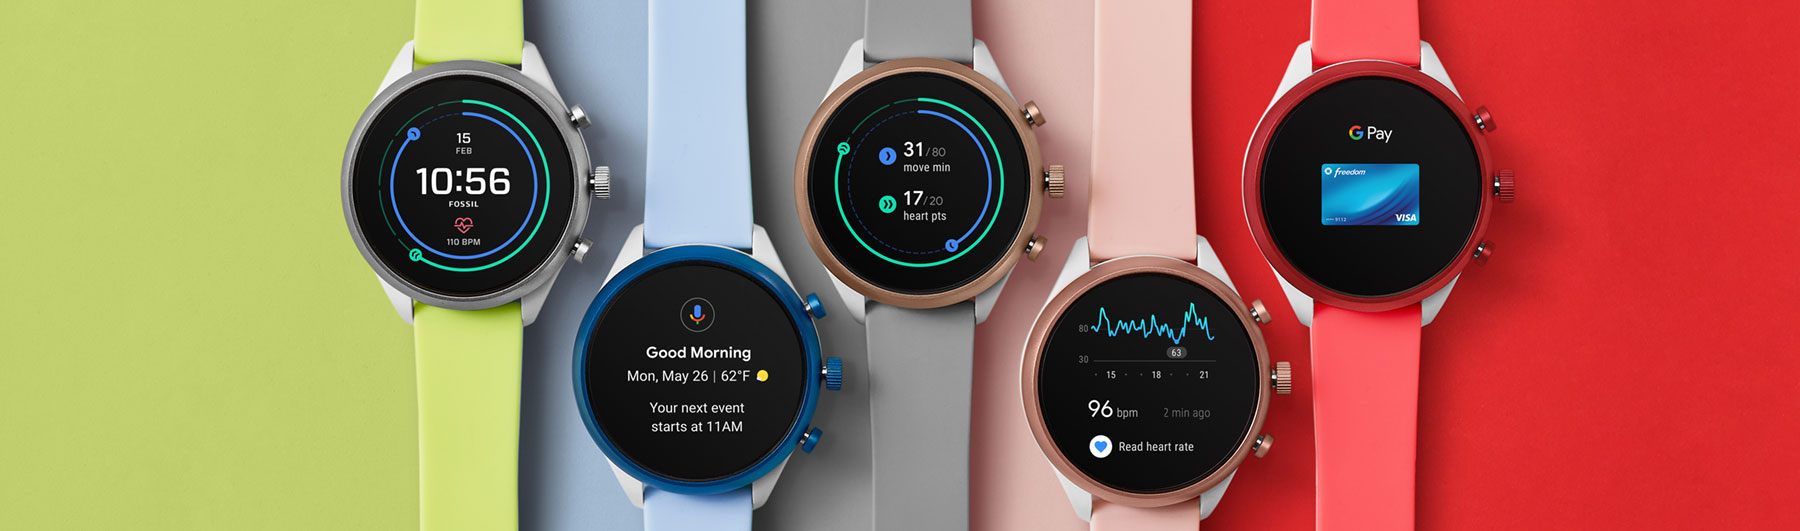 Fossil introduces their new sport smartwatch in an array of strap colors